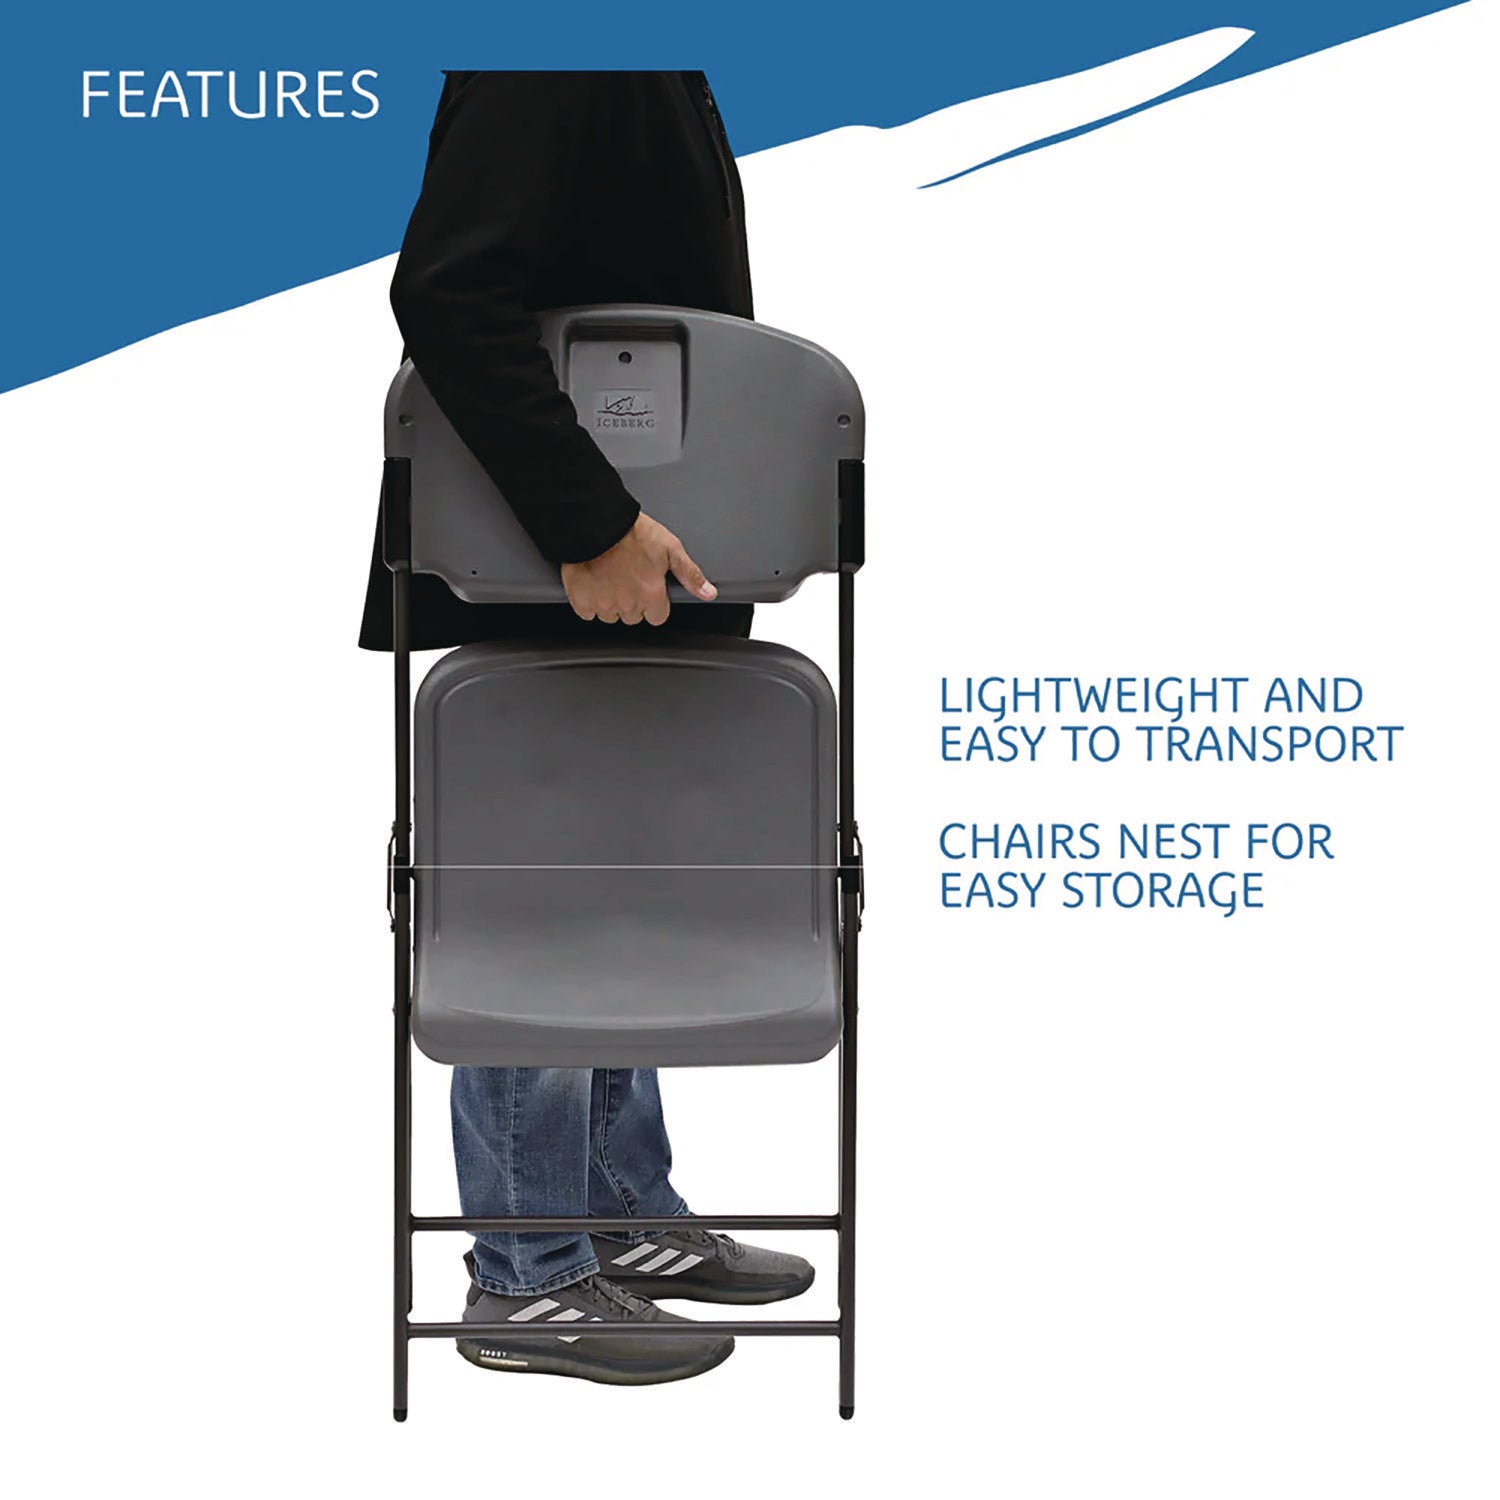 Rough n Ready Commercial Folding Chair, Supports Up to 350 lb, 15.25" Seat Height, Charcoal Seat, Charcoal Back, Silver Base - 6